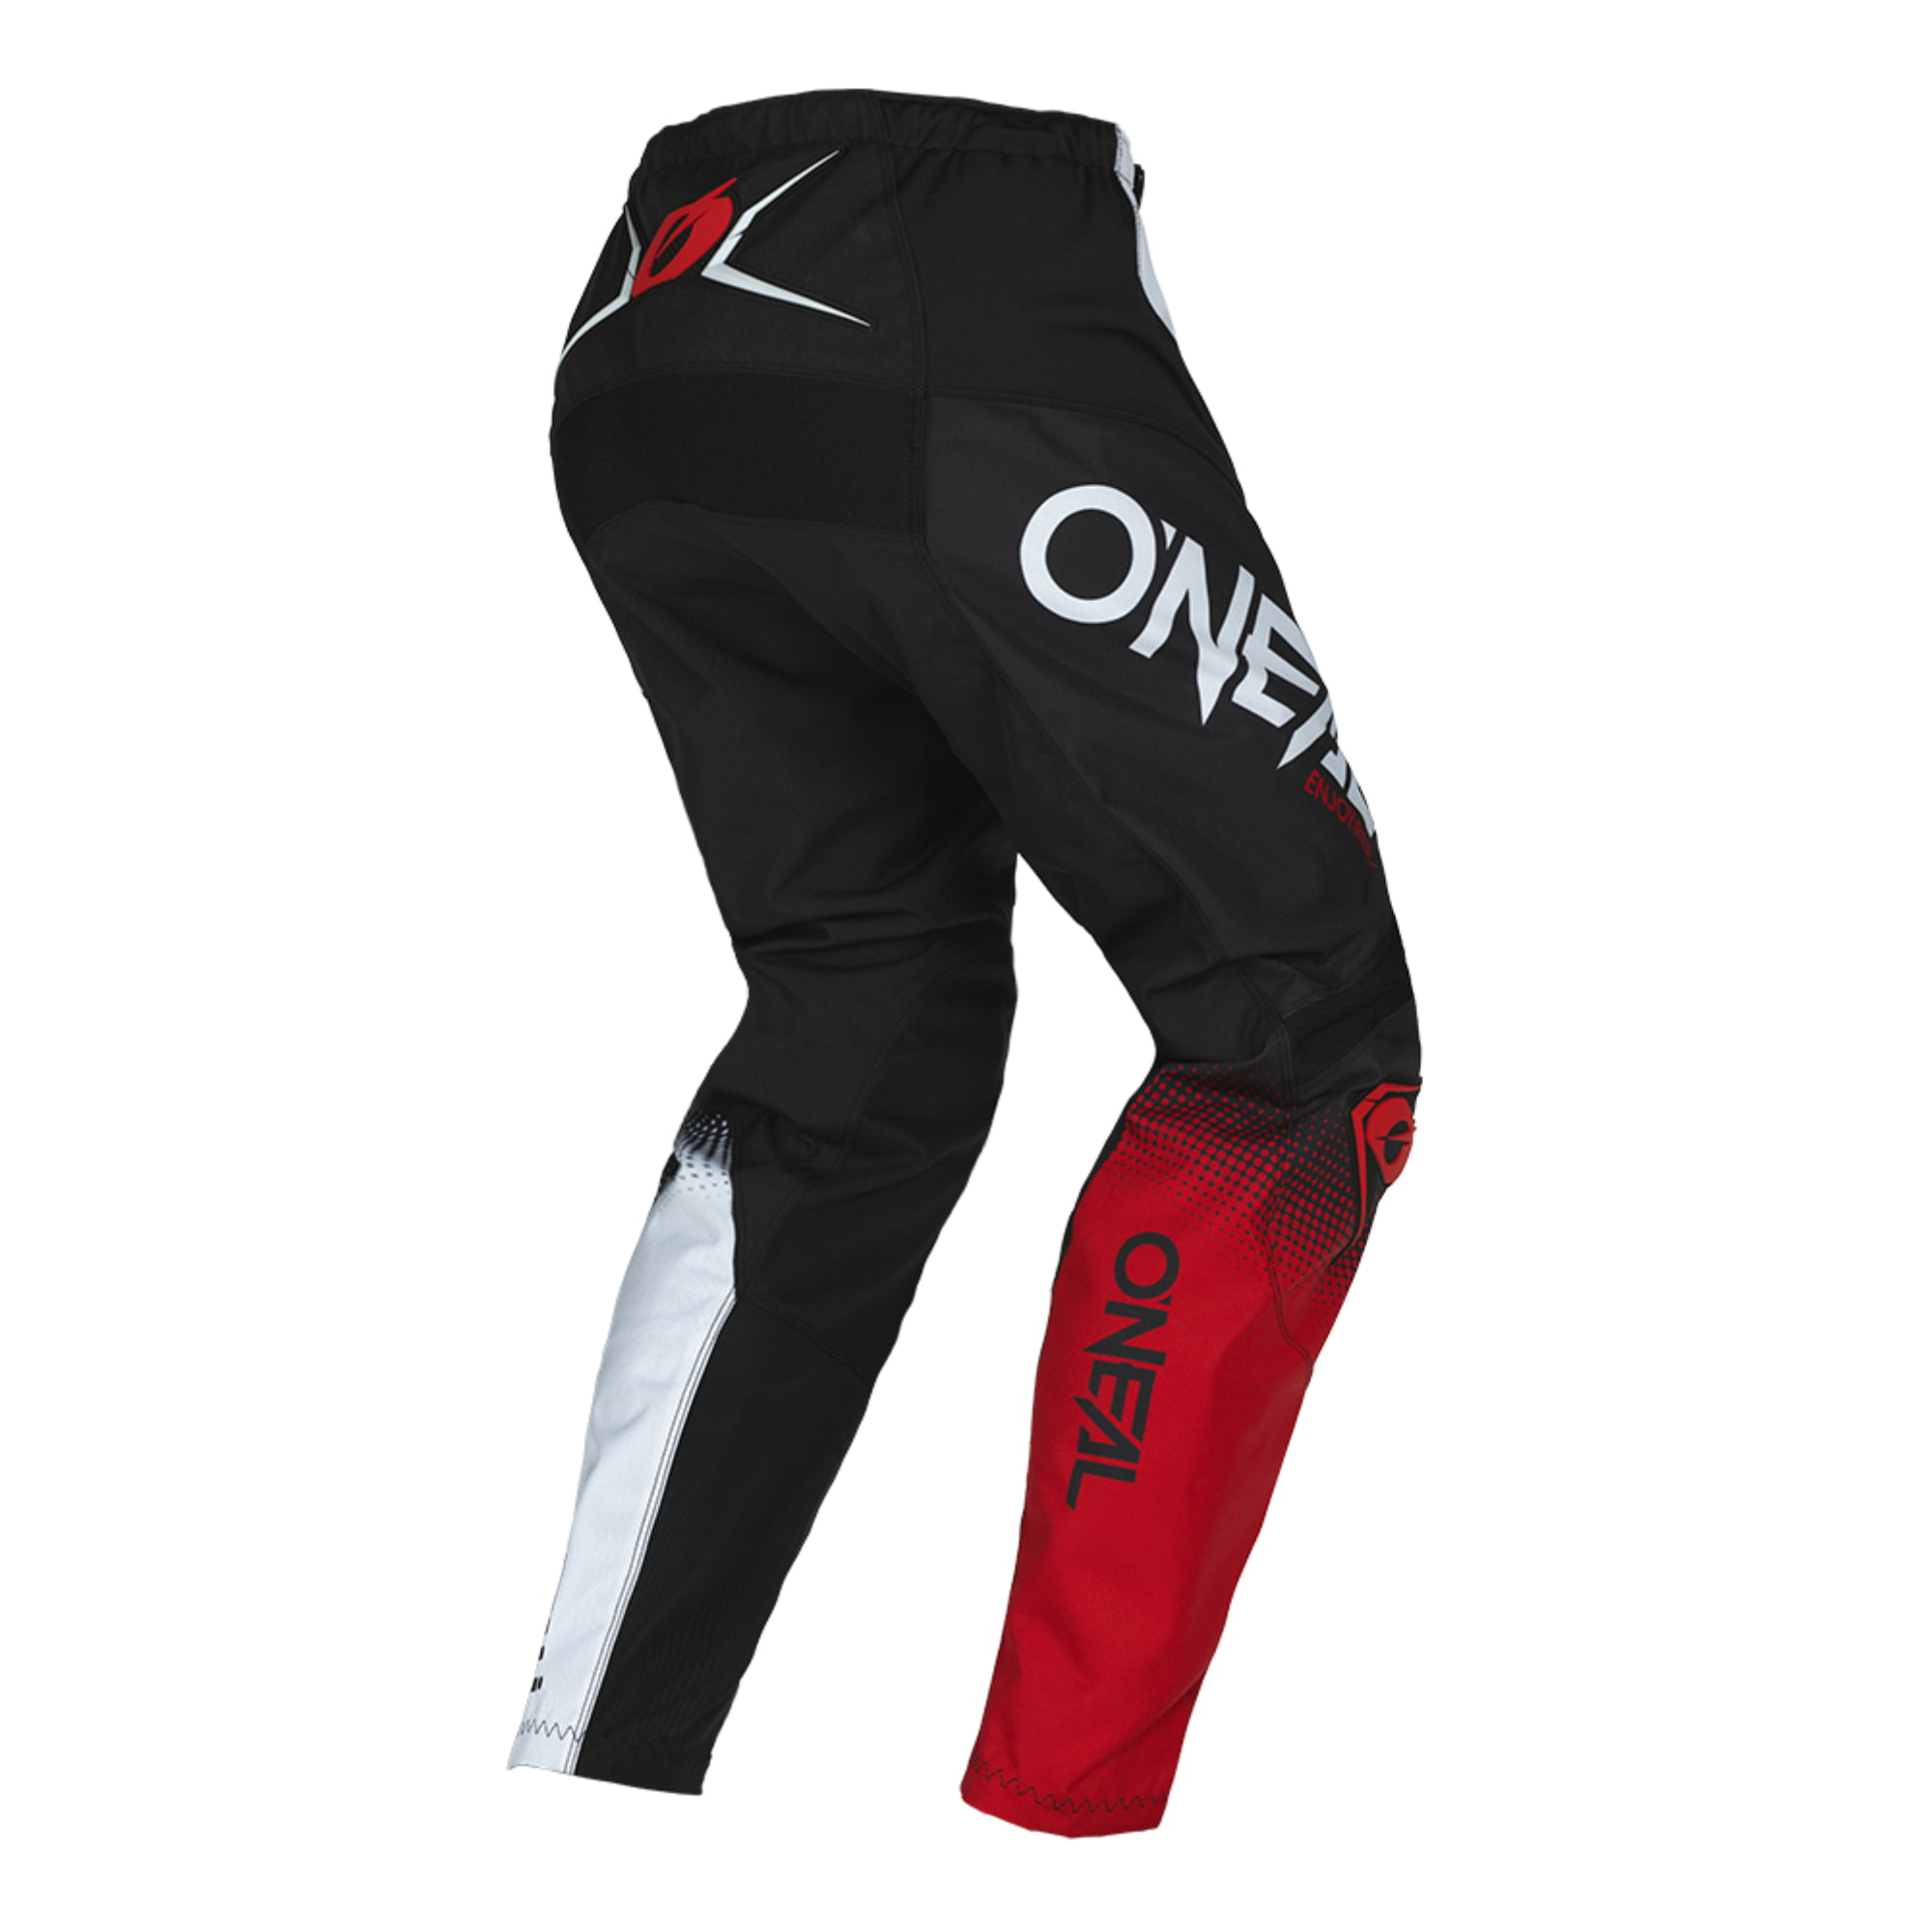 Black/White/Red, 24-25 ONeal Boys MX Pants 